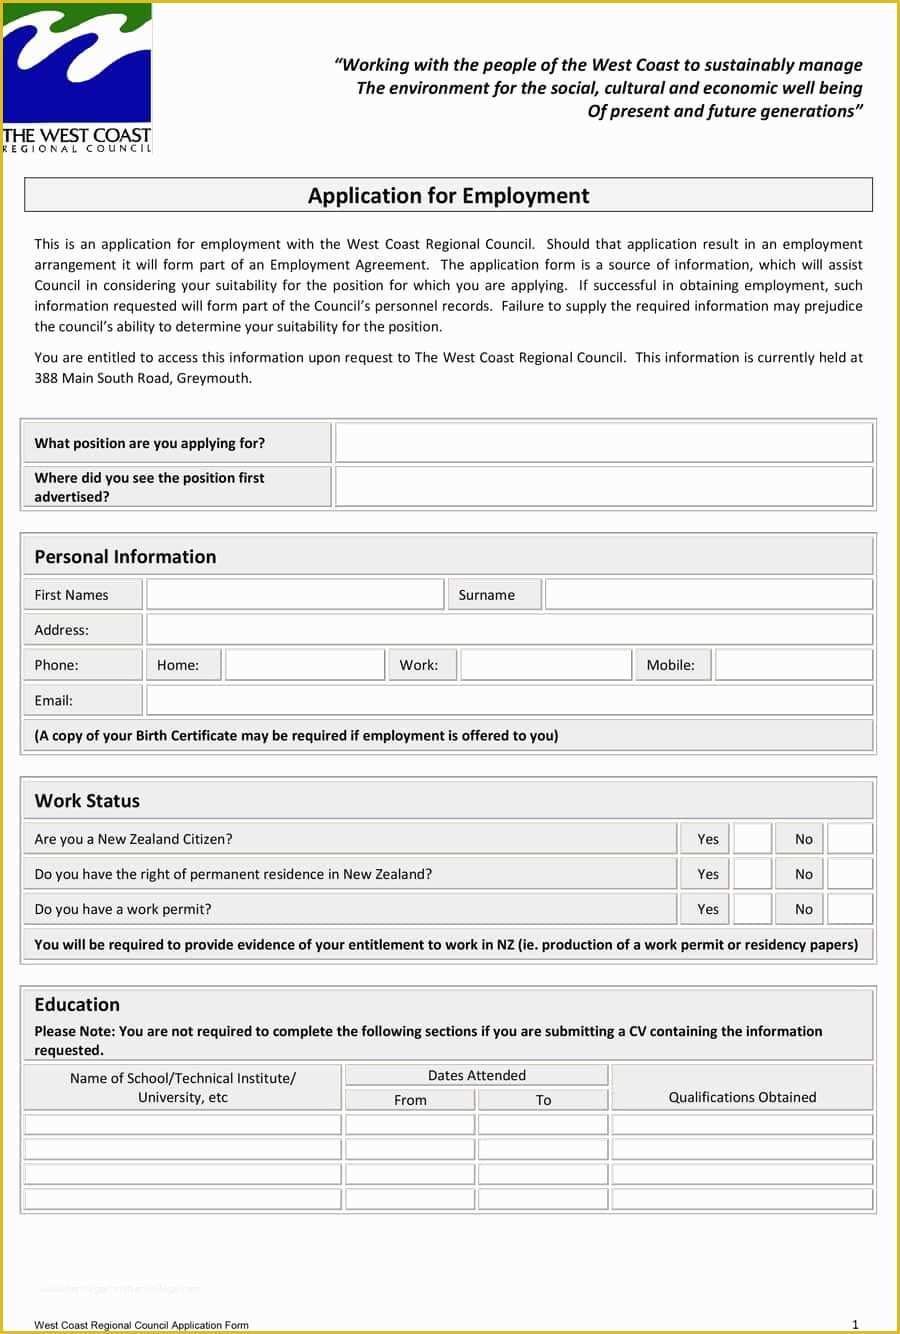 Free Employment Application Template Of 50 Free Employment Job Application form Templates